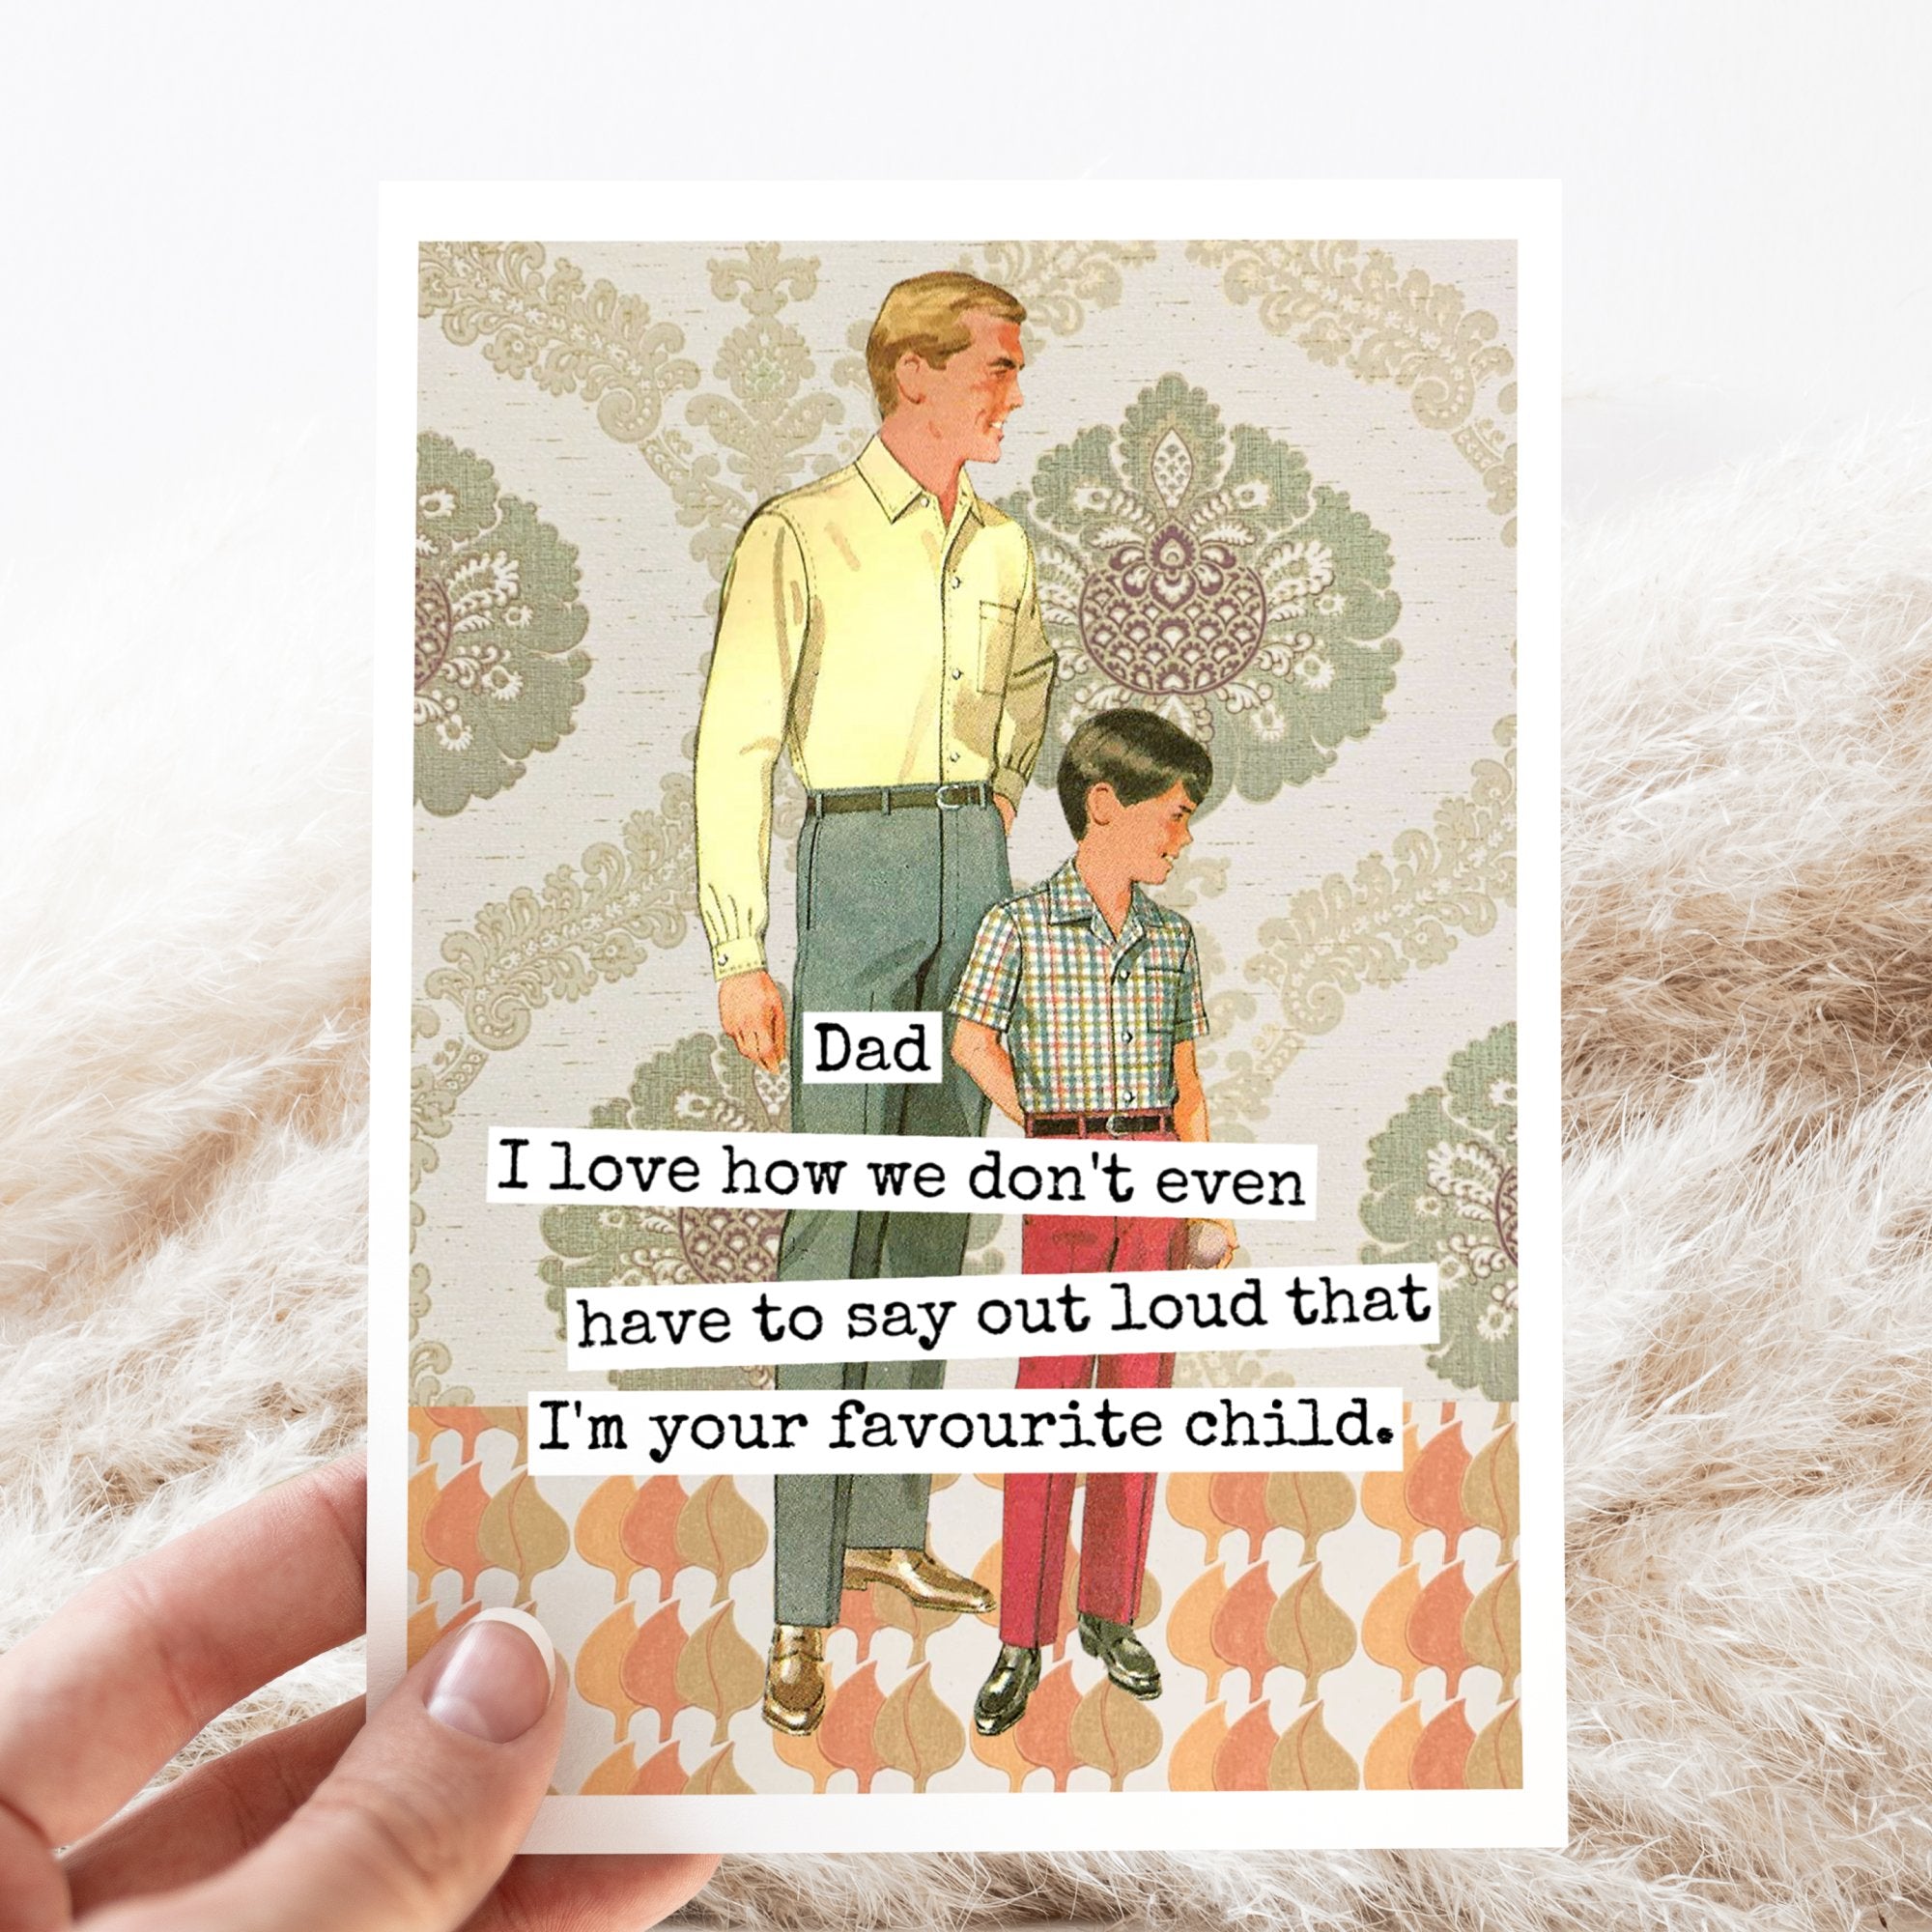 Greeting Card. Dad I Love How We Don't Even Have To Say... - My Filosophy